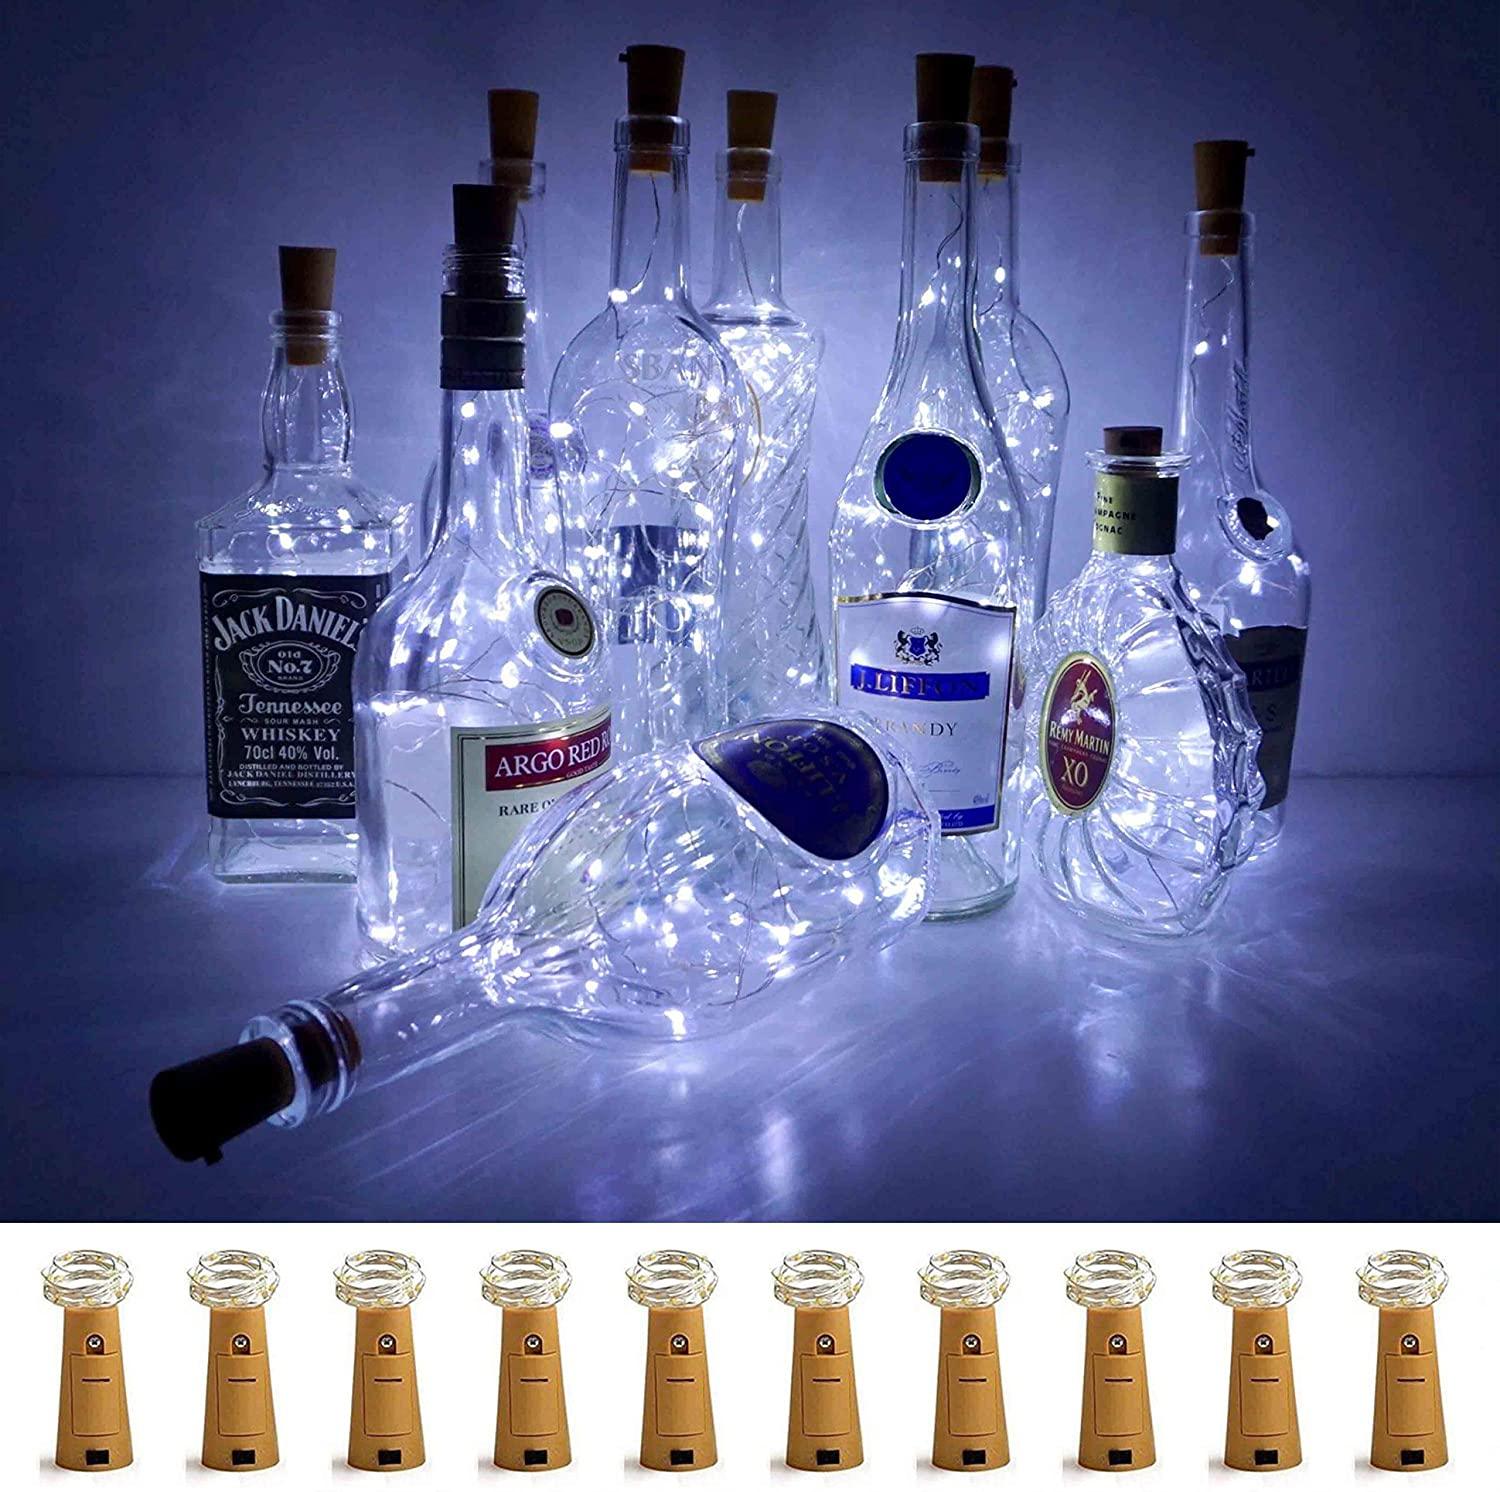 Wine Bottle Cork Lights 10 Pack 10 LED/ 40 Inches Battery Operated Cork Shape Copper Wire Colorful Fairy Mini String Lights - If you say i do